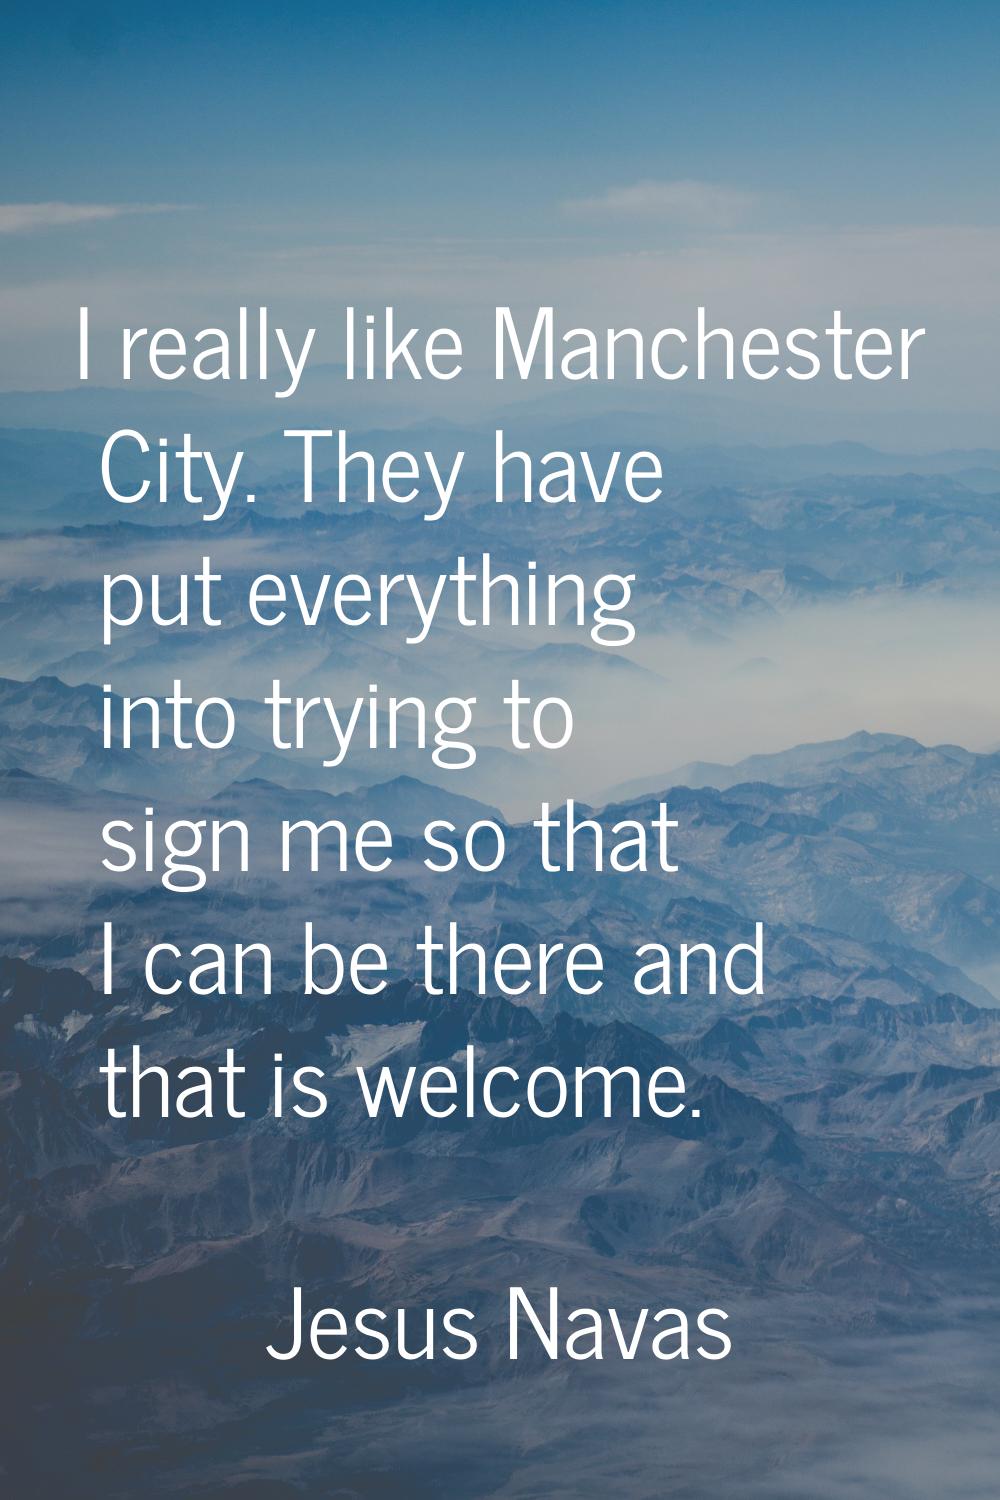 I really like Manchester City. They have put everything into trying to sign me so that I can be the